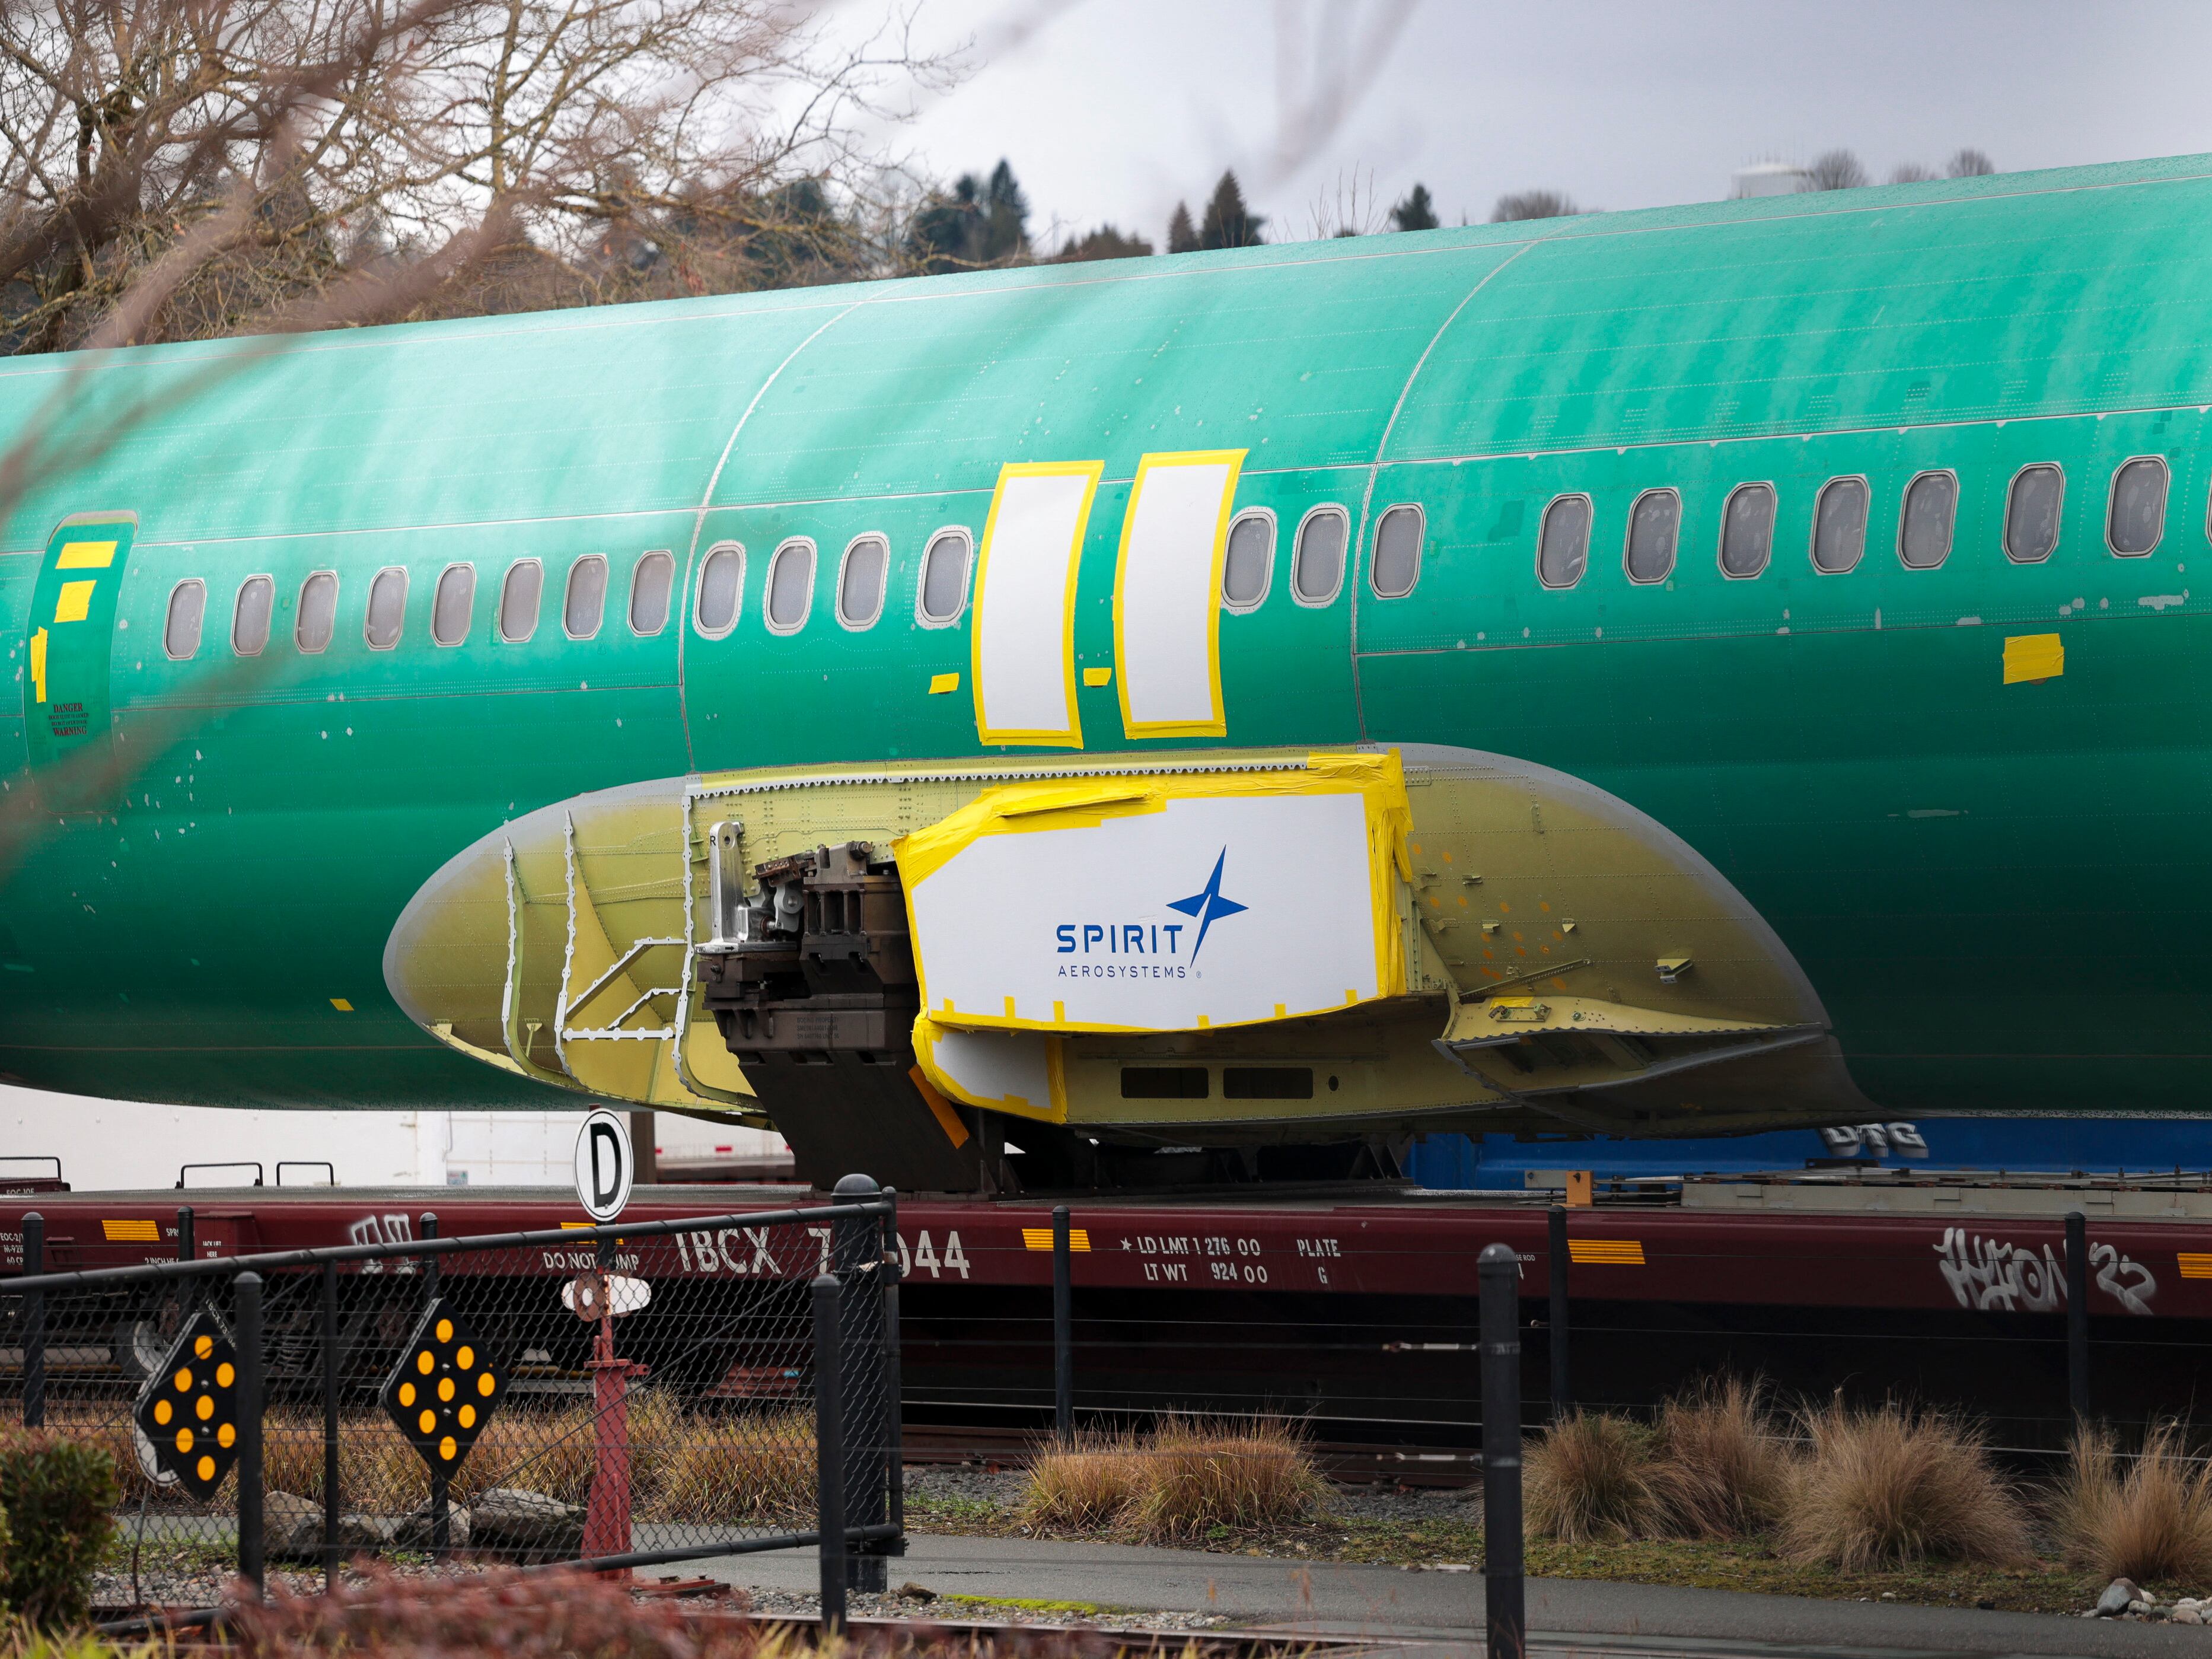 Joshua Dean, who died on Tuesday, had gone public with his concerns about defects and quality-control problems at Spirit AeroSystems, a major supplier of parts for Boeing. Here, a Spirit AeroSystems logo is seen on a 737 fuselage sent to Boeing's factory in Renton, Wash., in January.